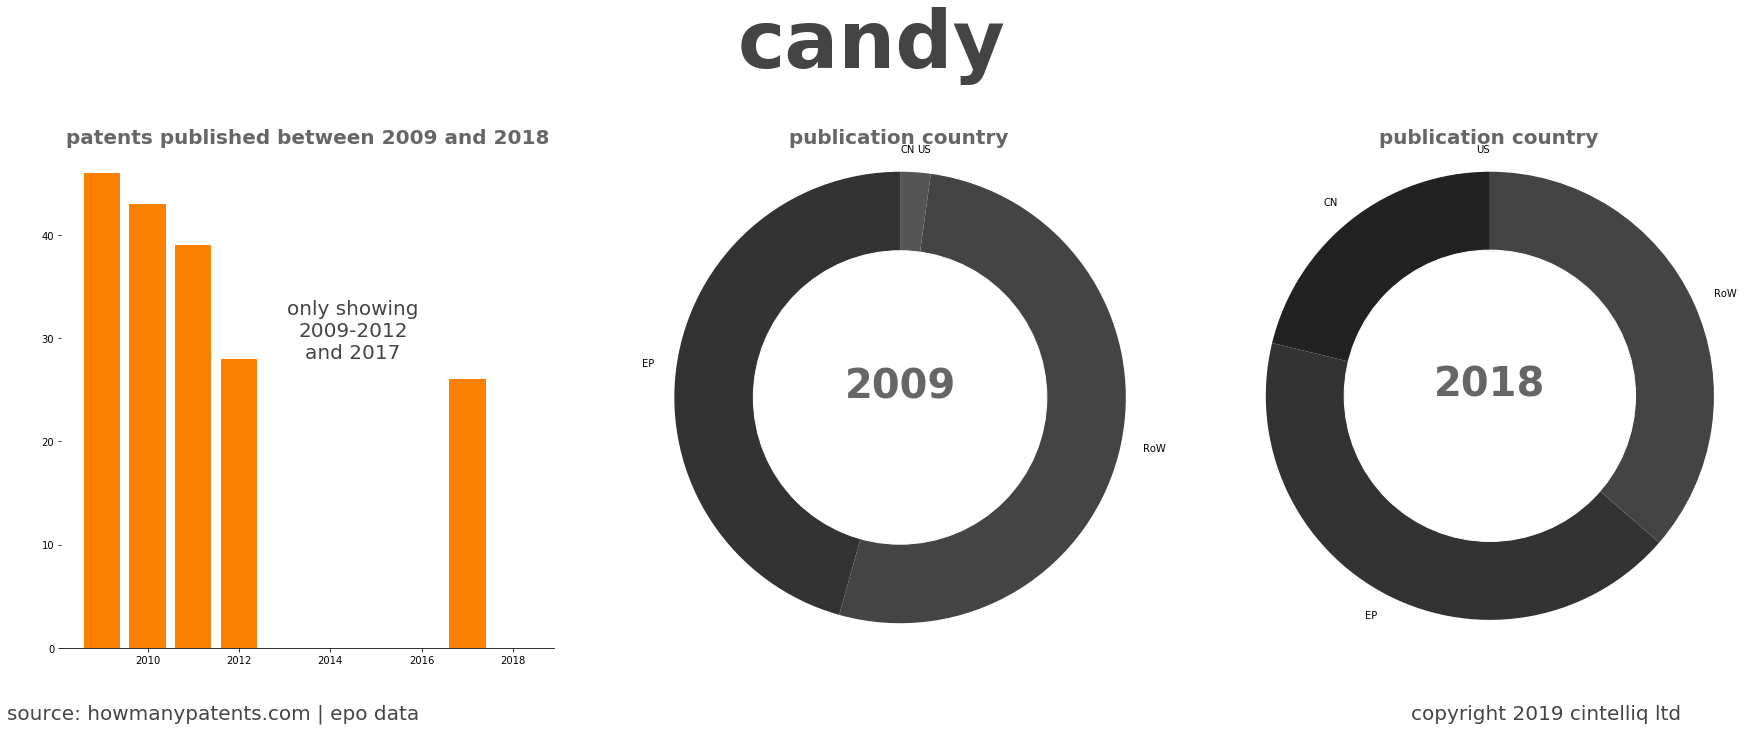 summary of patents for Candy